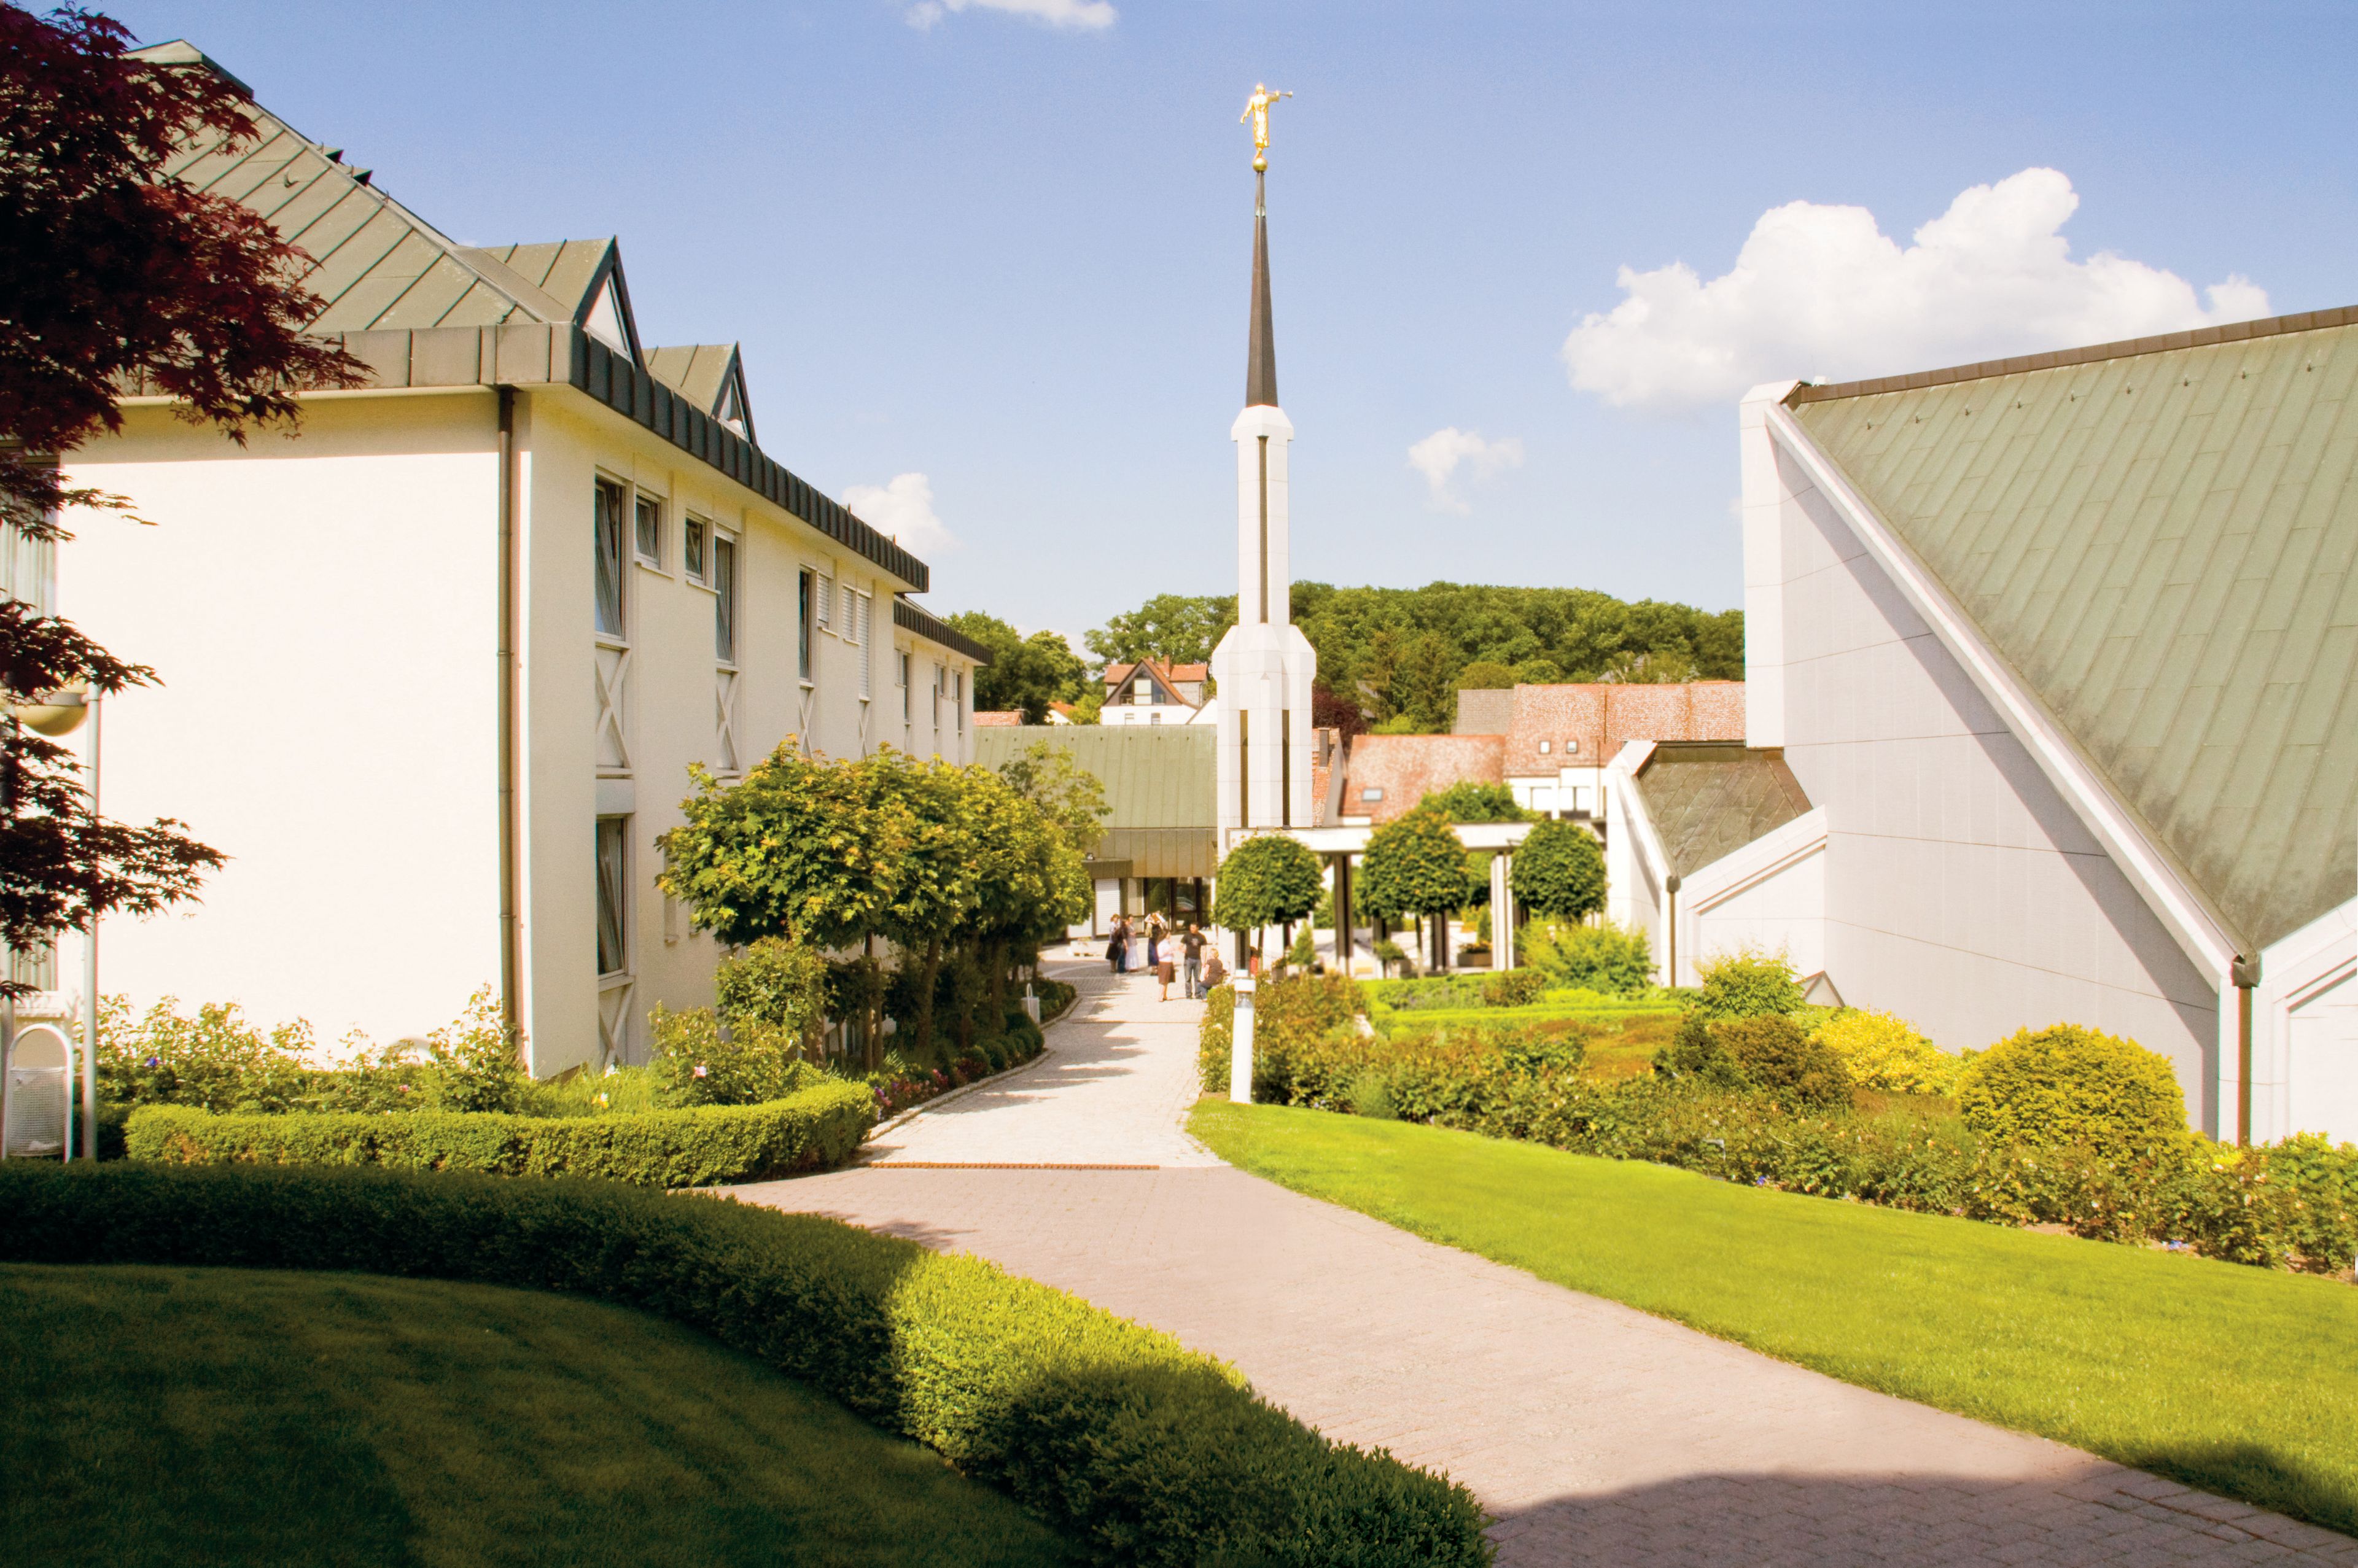 A view of the Frankfurt Germany Temple from the back.